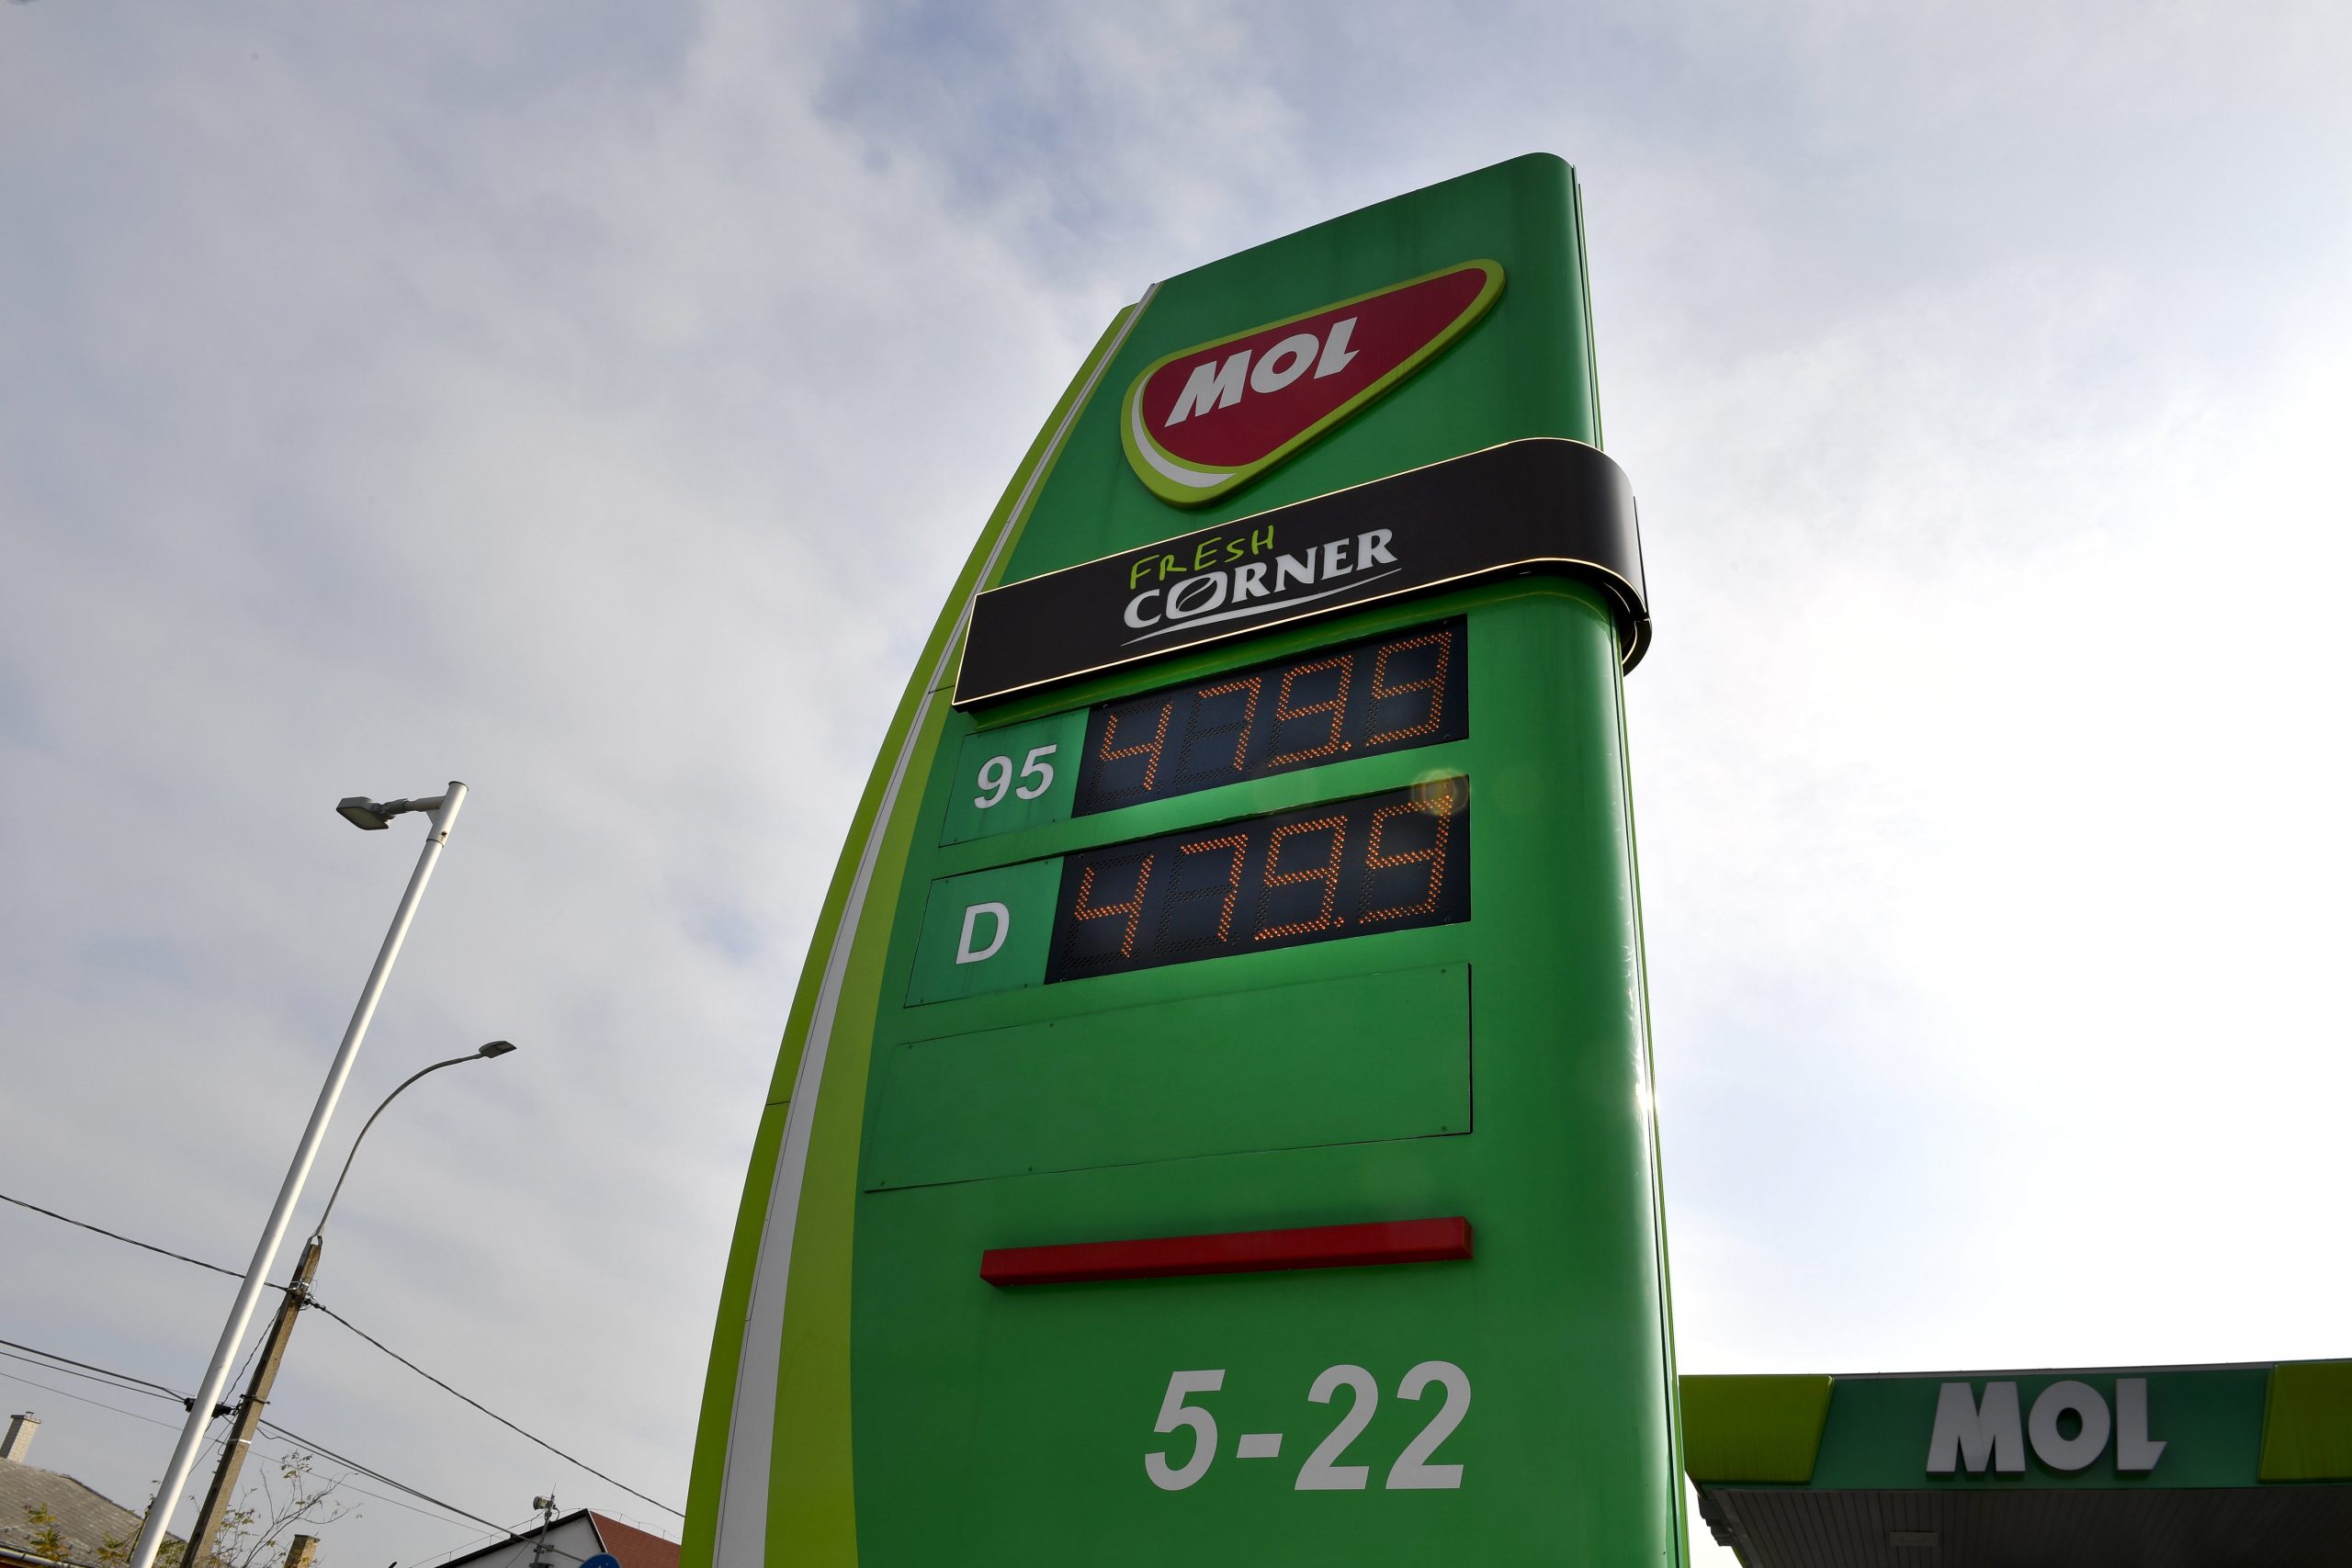 From now on, all gas stations are losing money on fuel sales